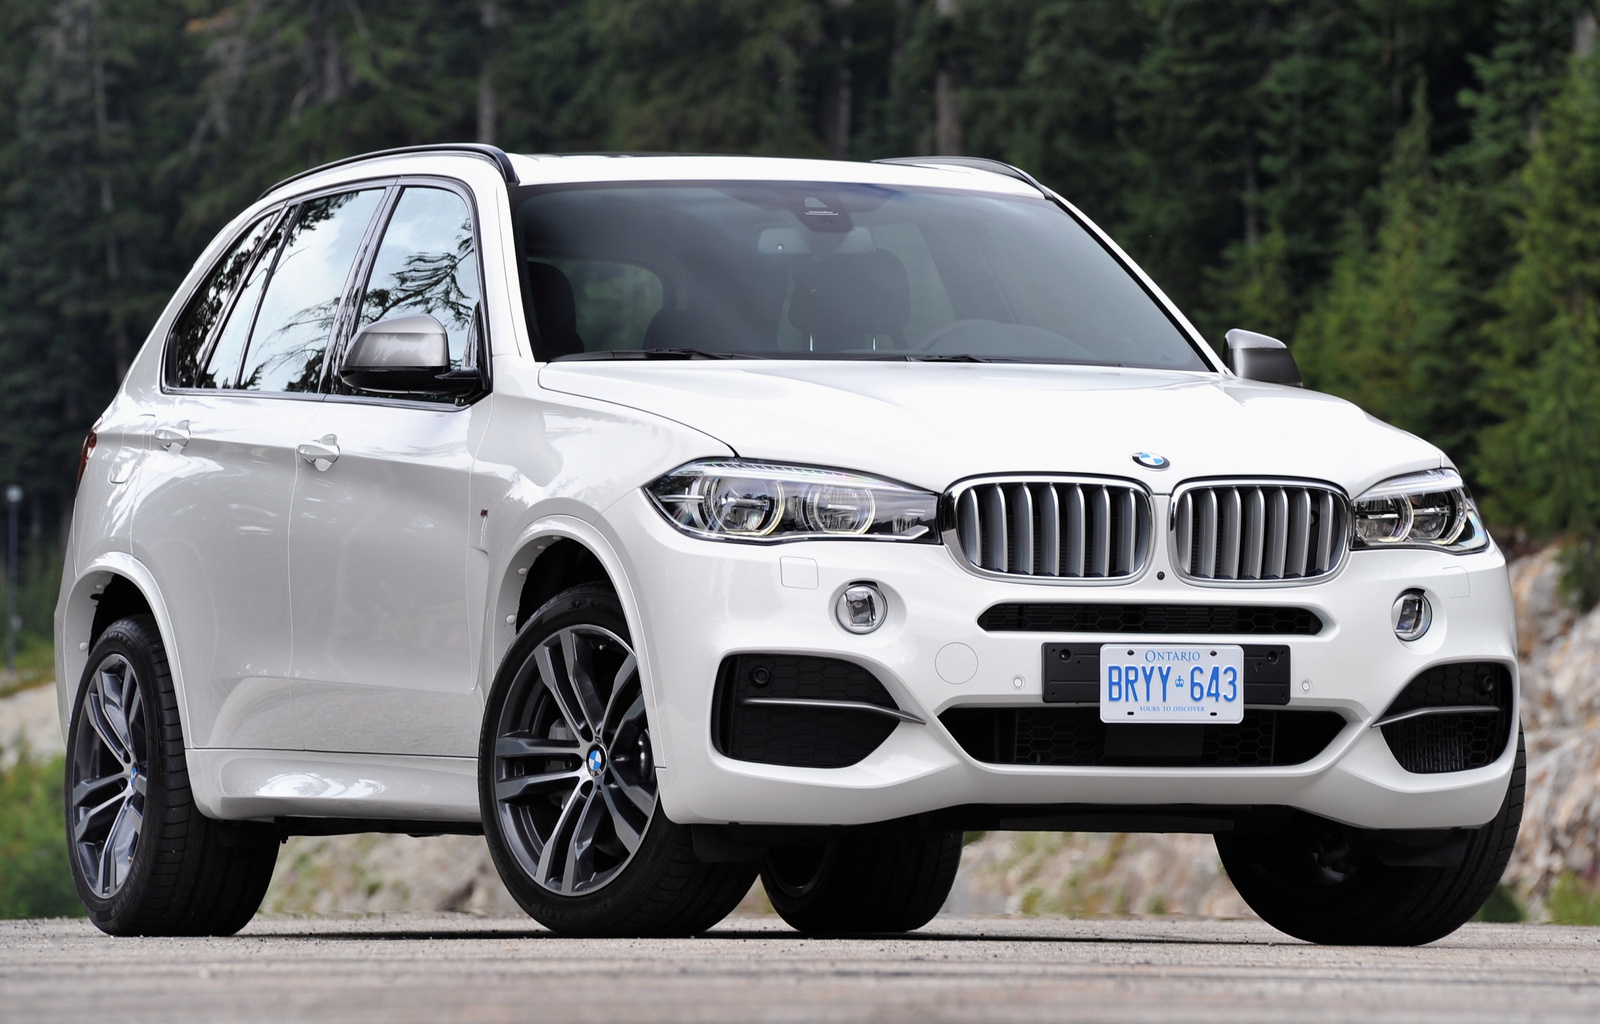 BMW X5 Price, Images, Reviews and Specs